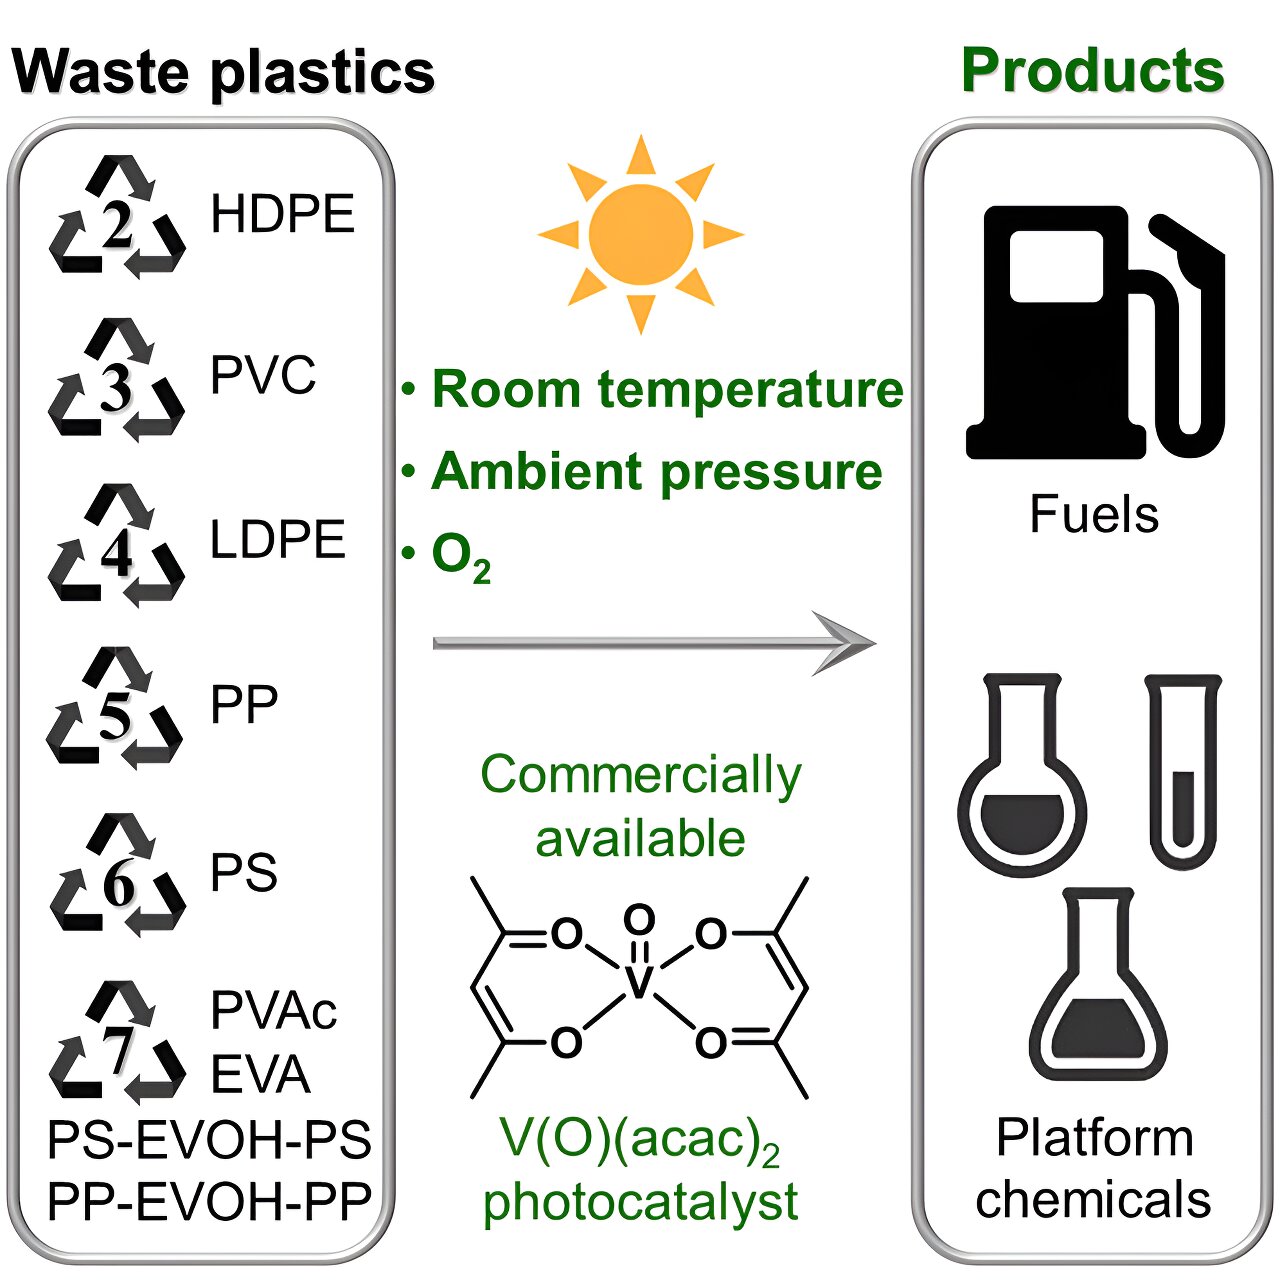 Scientists create process to upcycle plastics into energy-storage liquids using light-emitting diodes